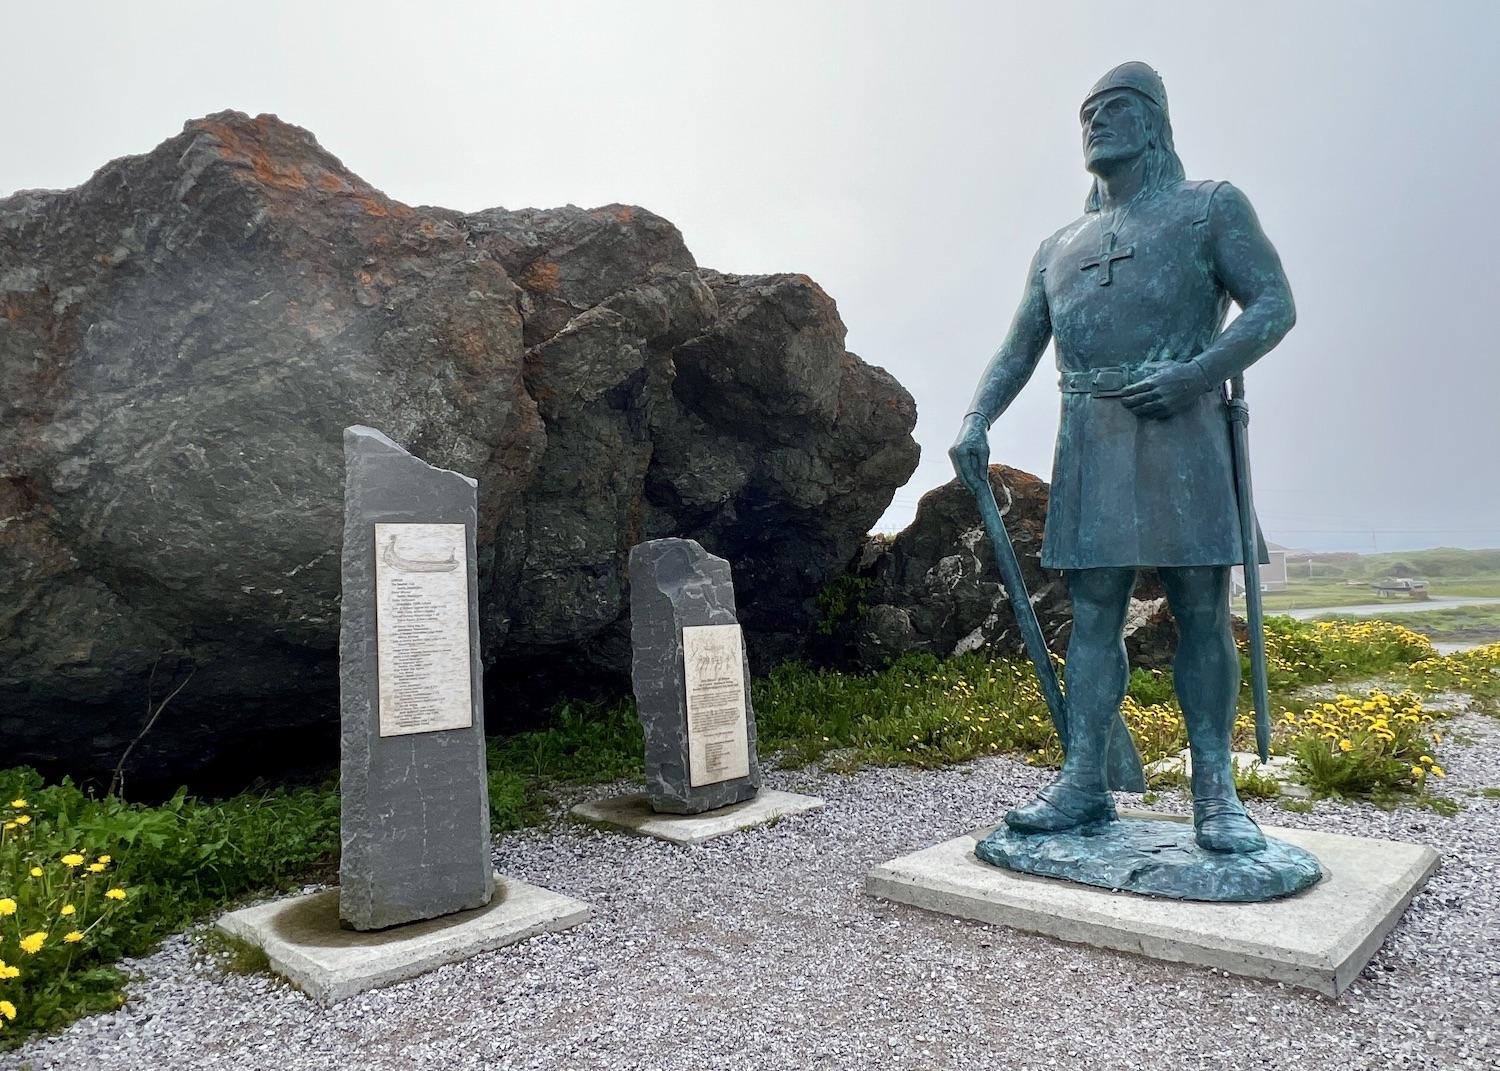 A statue of Norse explorer Leifur Eiríksson stands in the harbor of the community of L'Anse aux Meadows, not far from the national historic site.